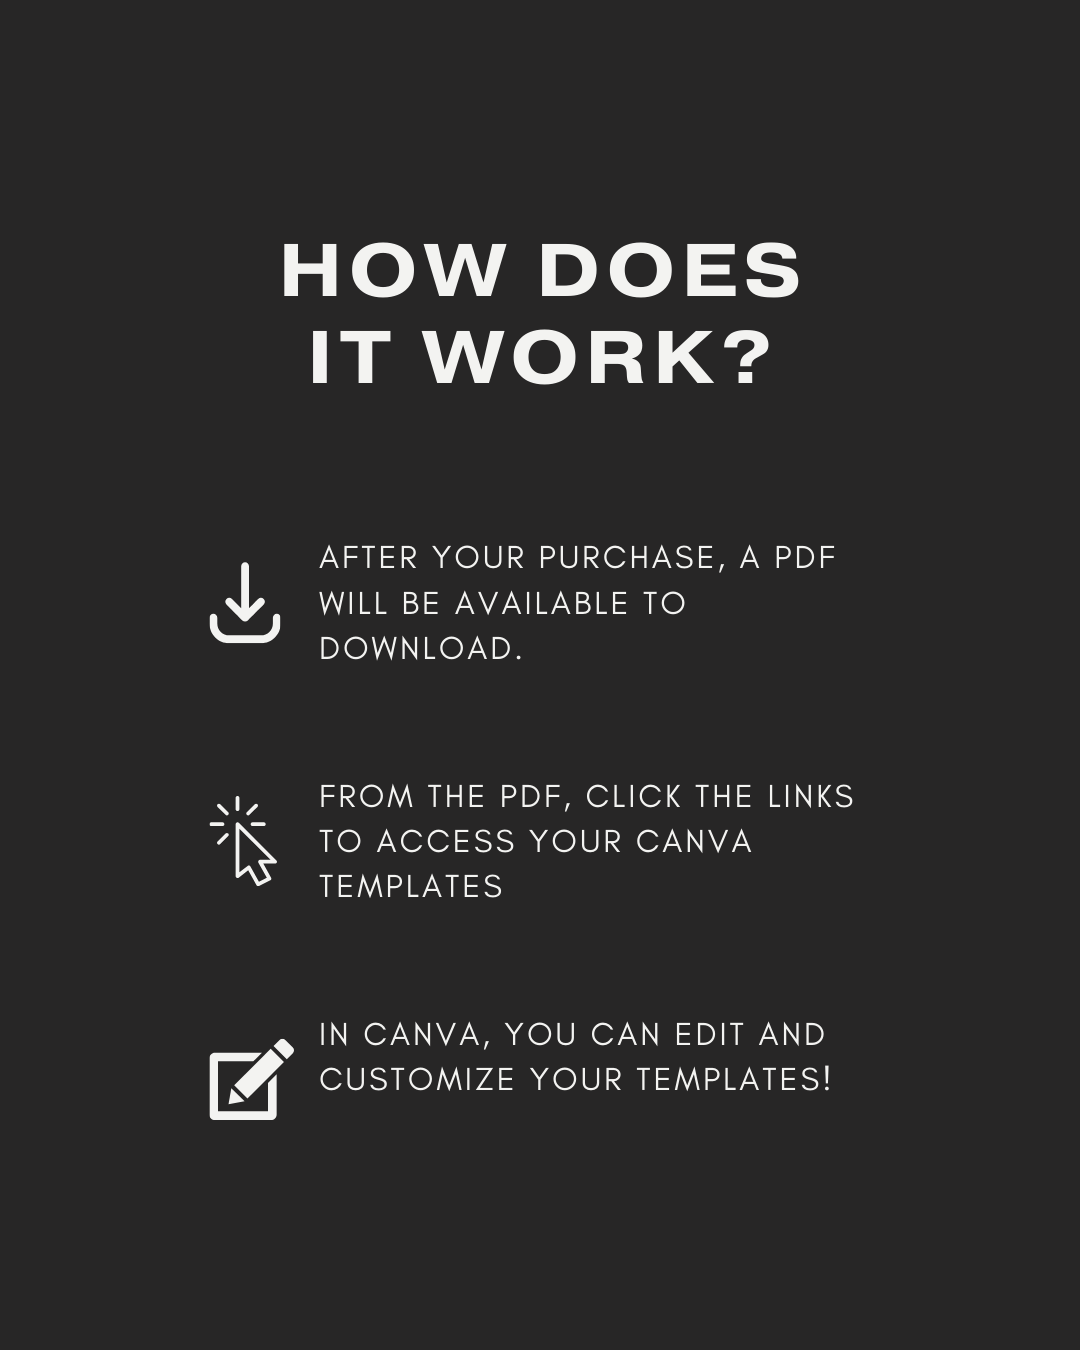 25 Meme Instagram Reels & Story Templates for Microblading Microblading  Business PMU Eyebrows Permanent Makeup Artist Canva Templates -  Canada